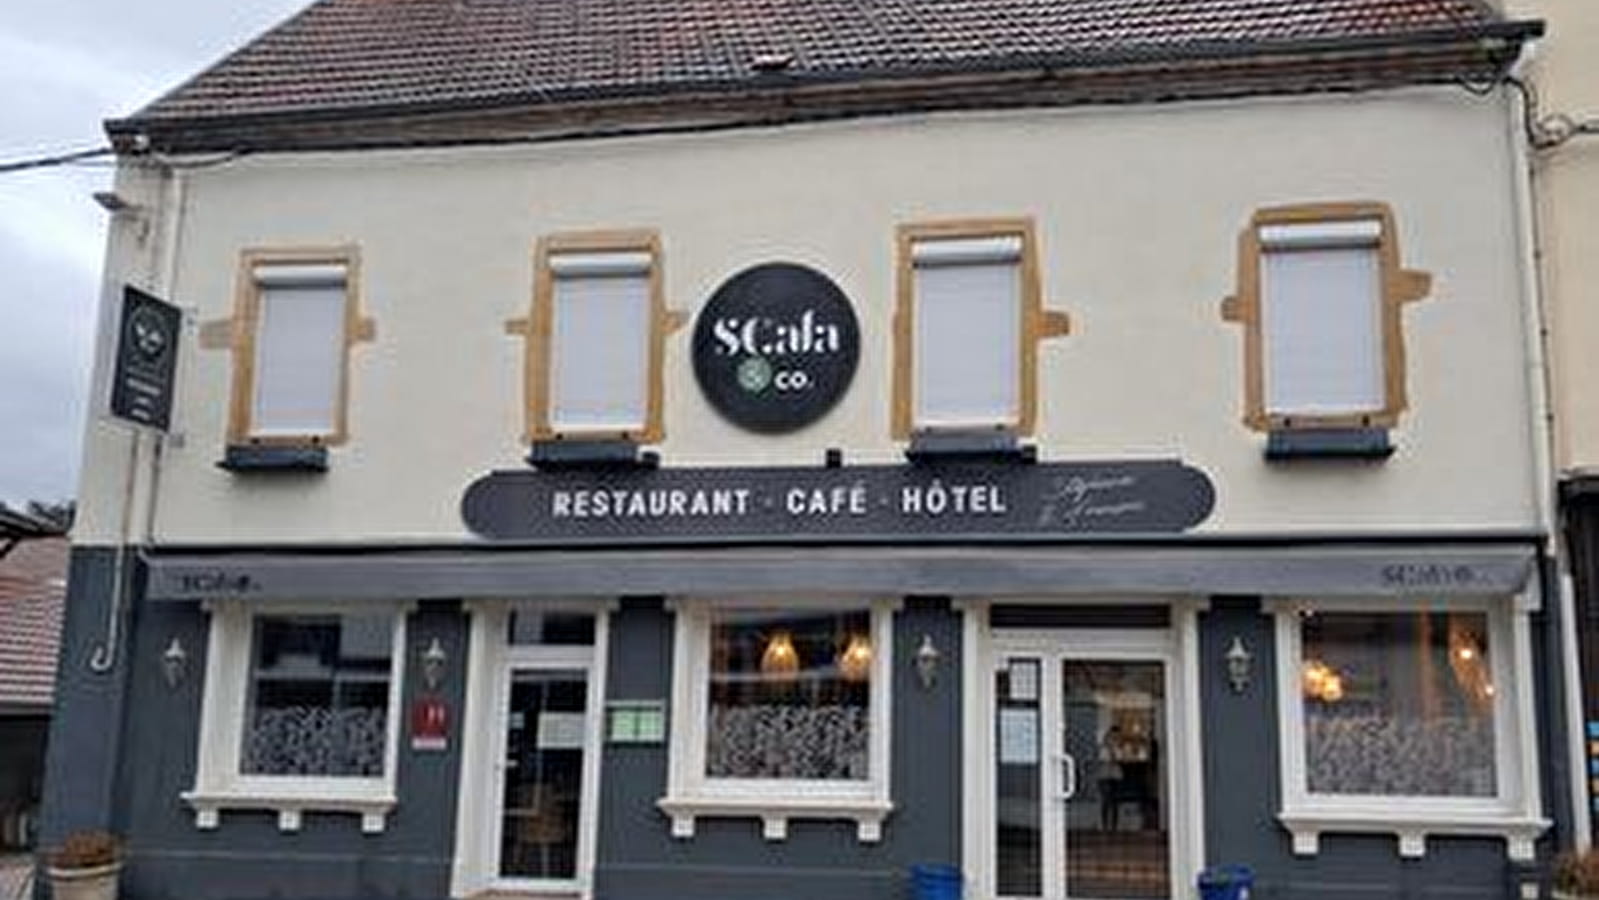 Restaurant SCALA and CO